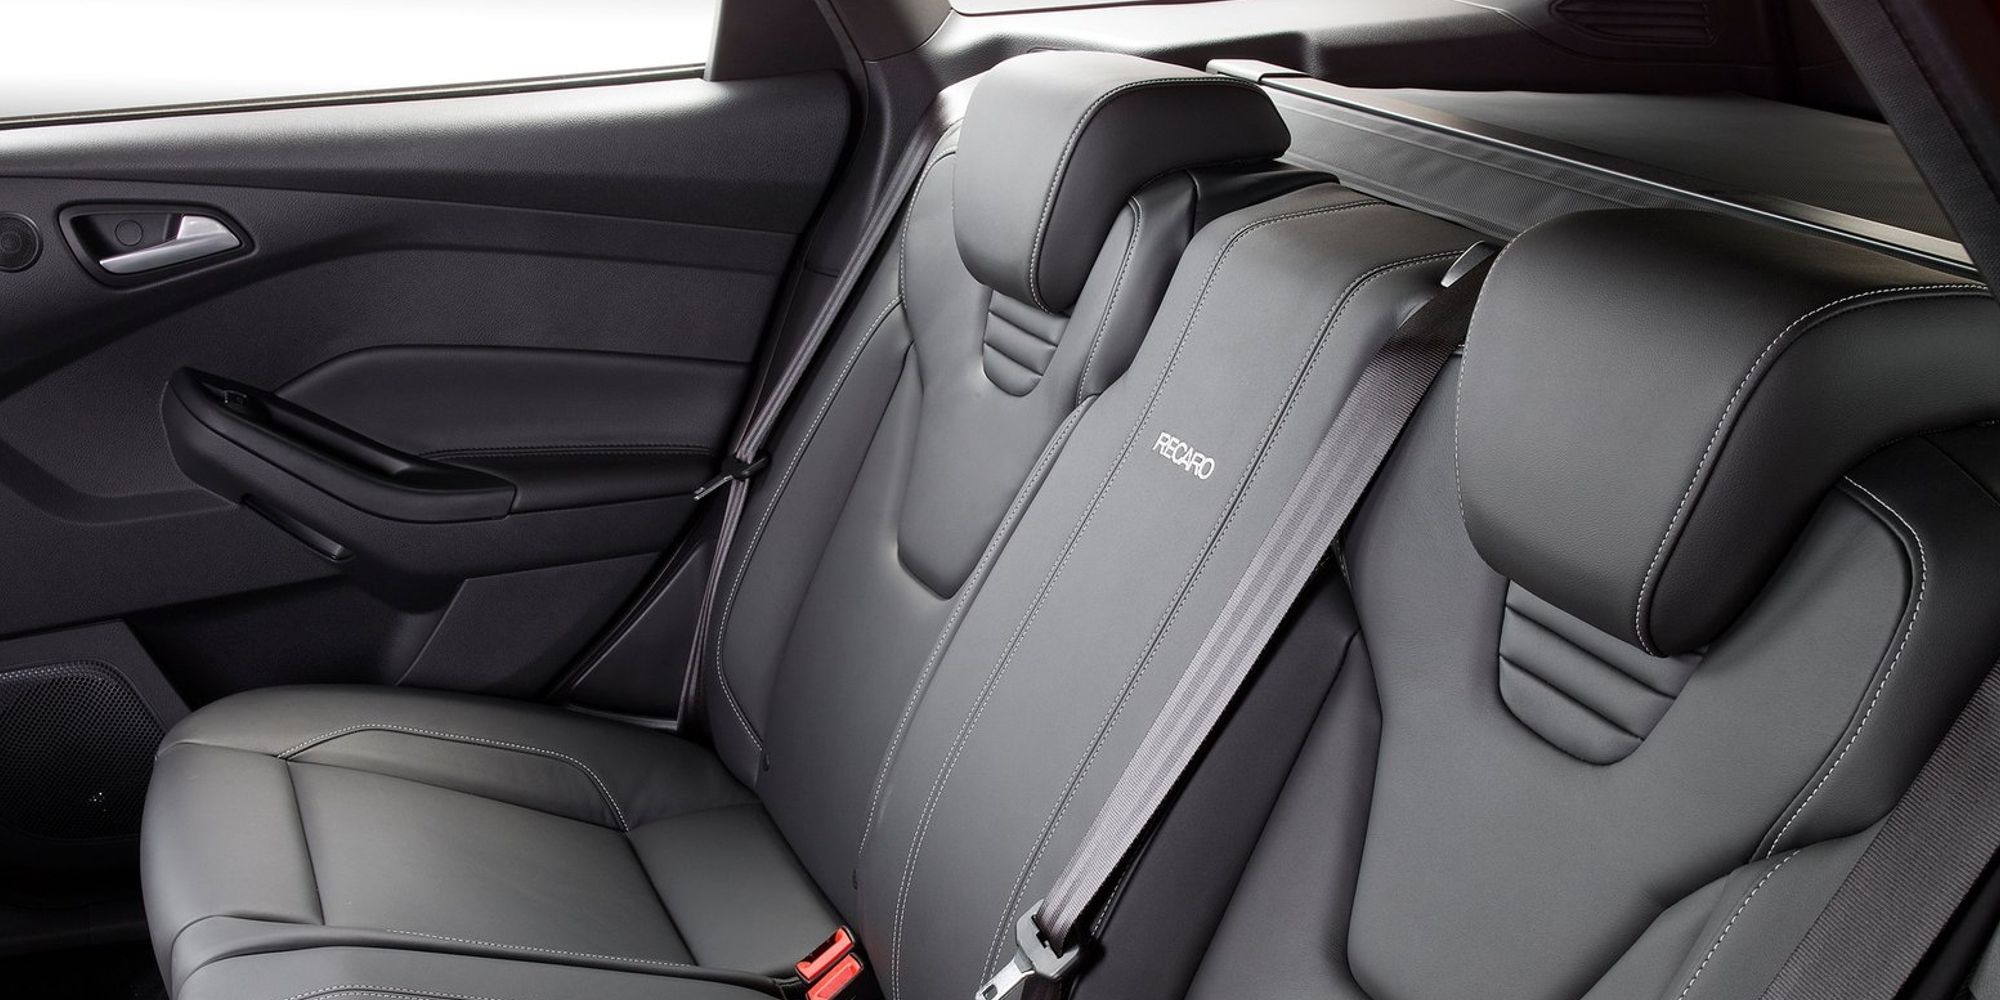 The rear seats in the Focus ST